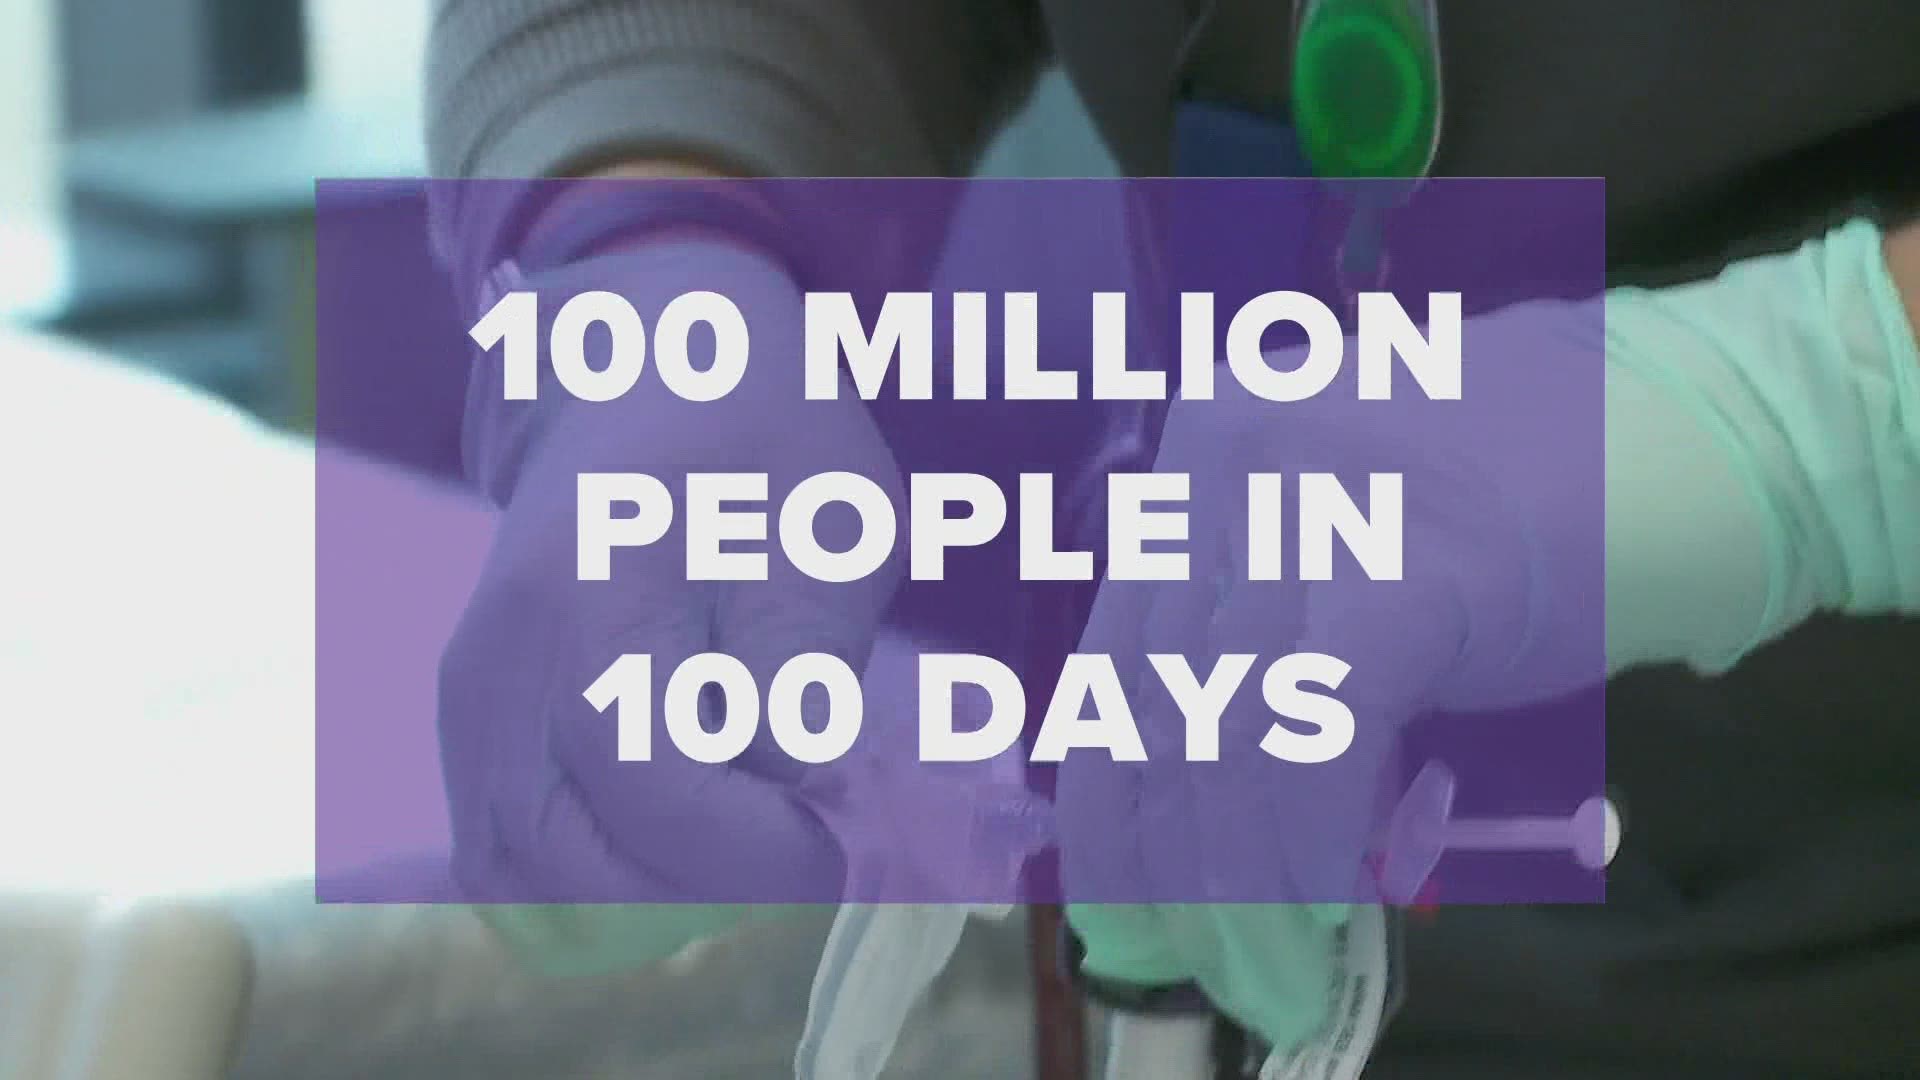 Is 100 million vaccinations in 100 days too ambitious or not ambitious enough?